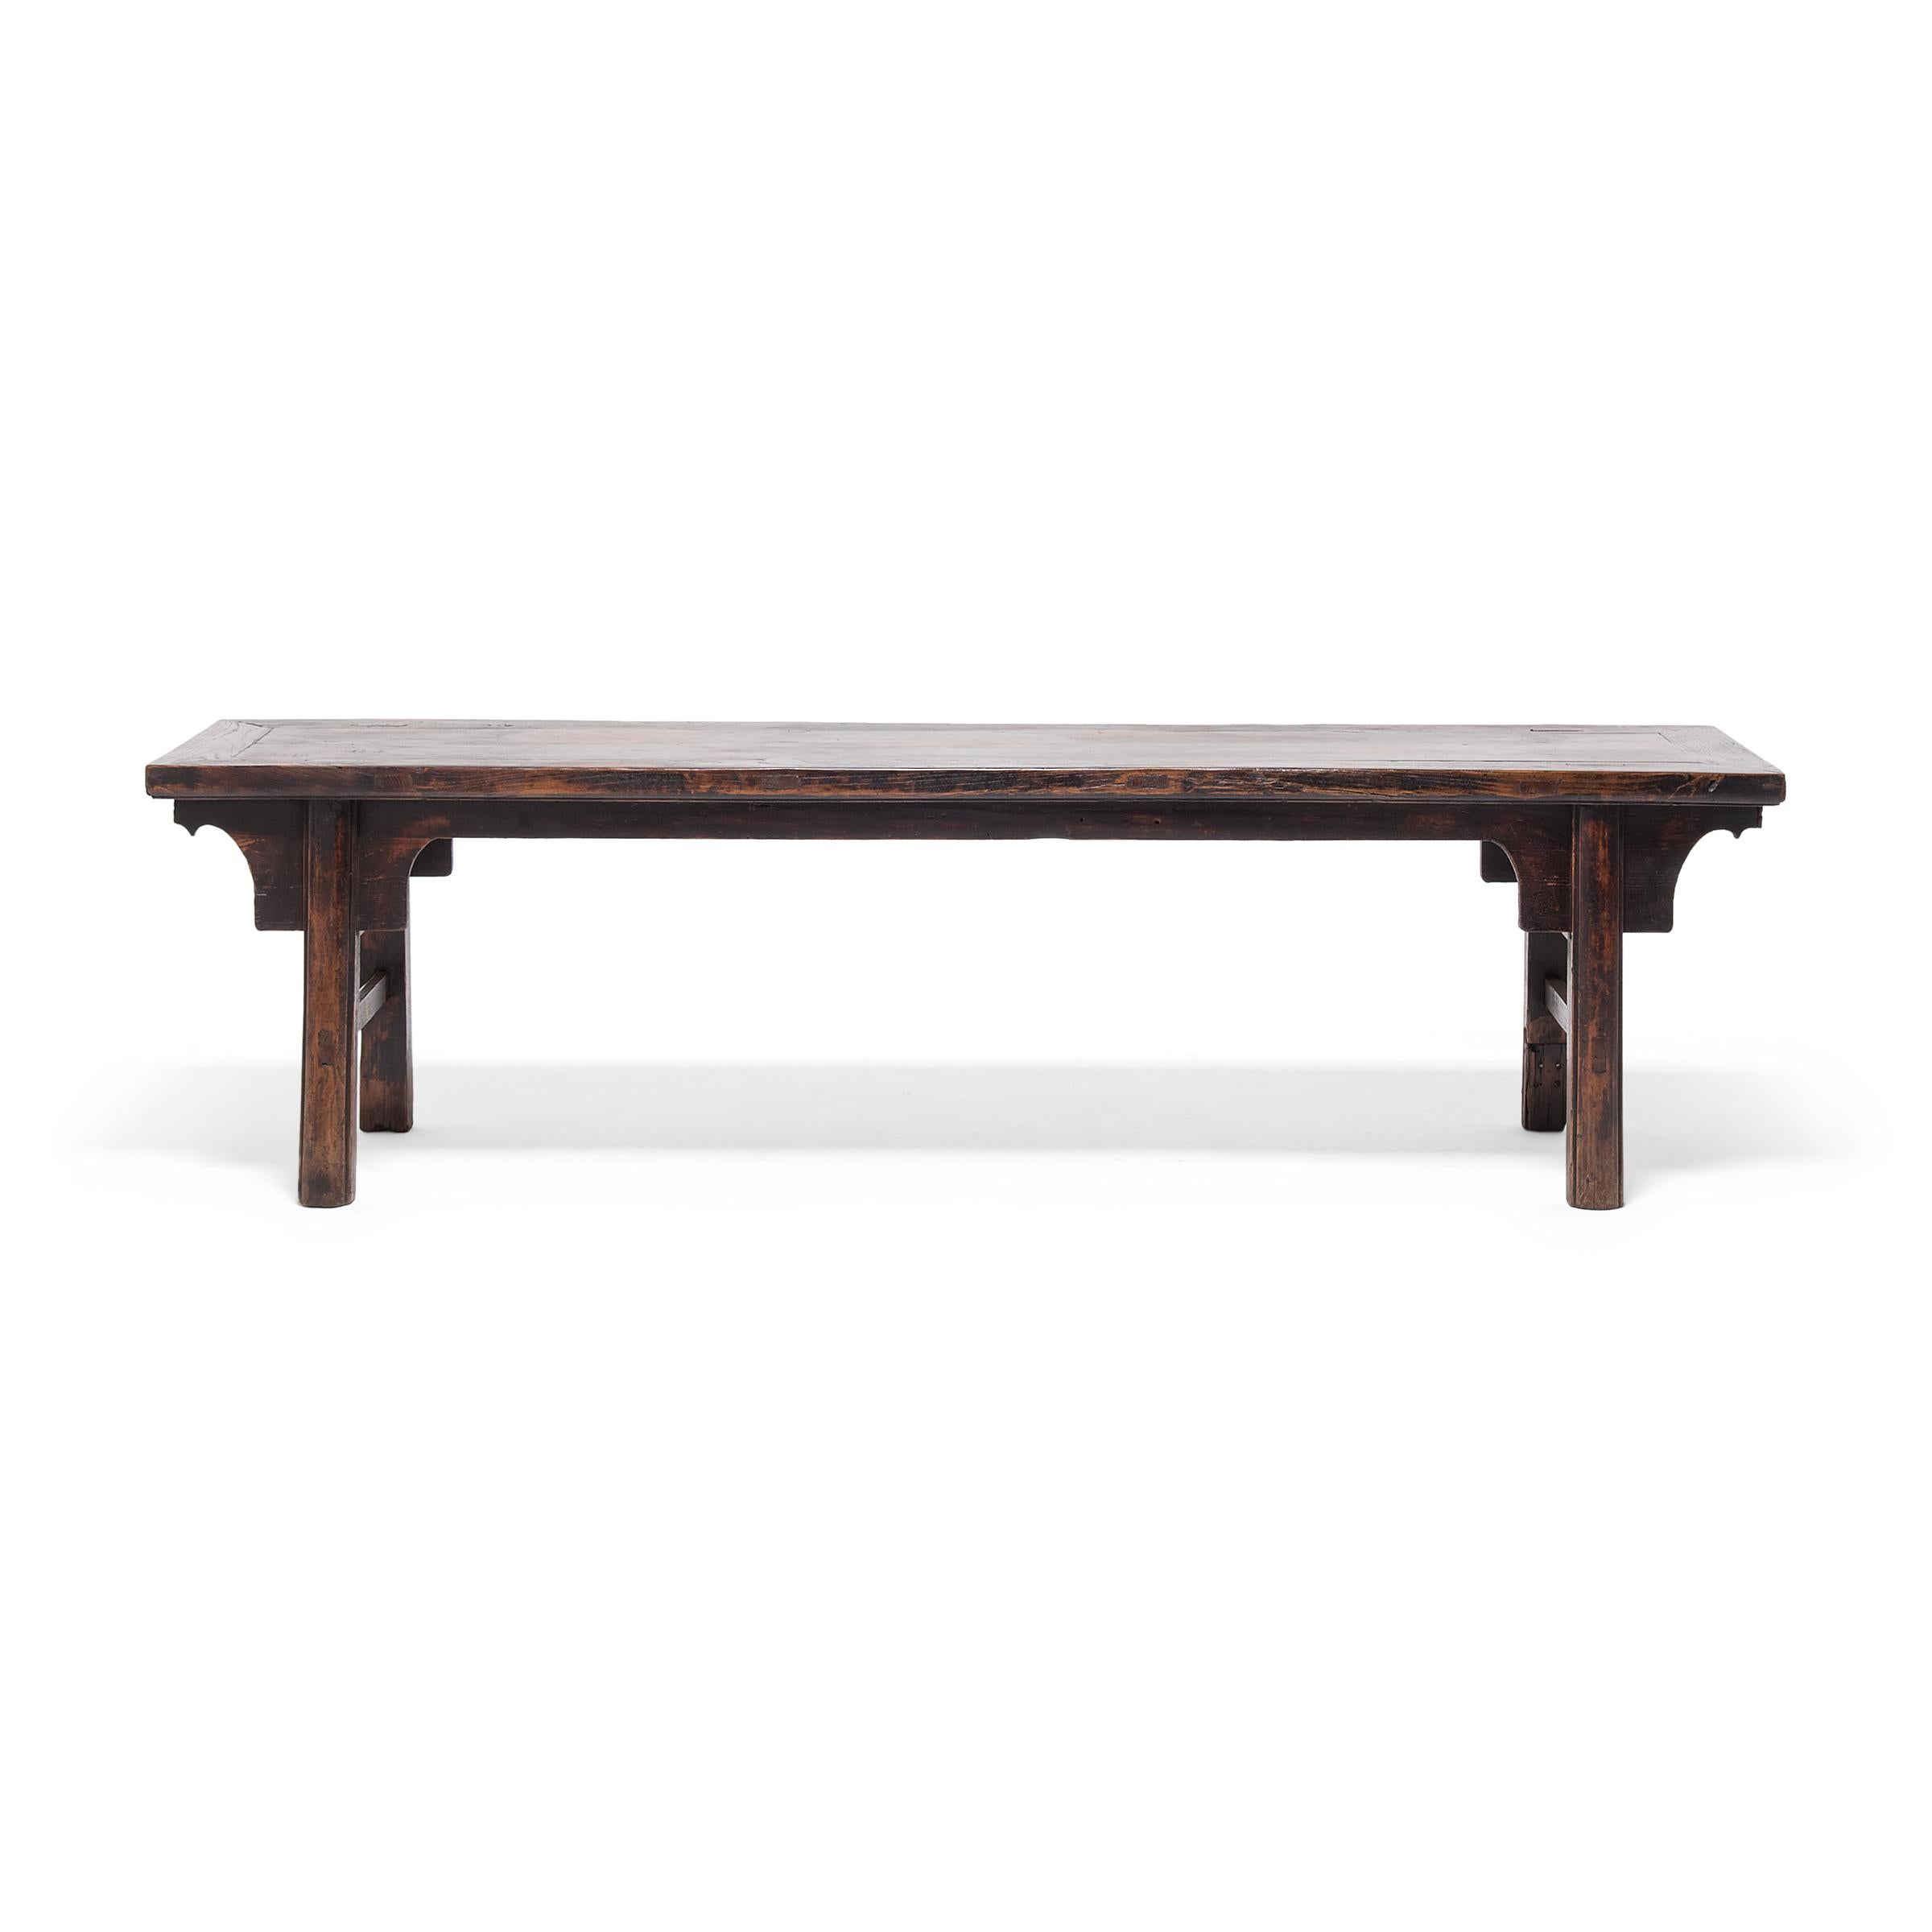 This three-person bench from China's Shanxi province follows the classic recessed-leg form, defined by legs that are set back from the edge of the top surface and slightly splayed for stability. Popular since the Song dynasty, the recessed-leg